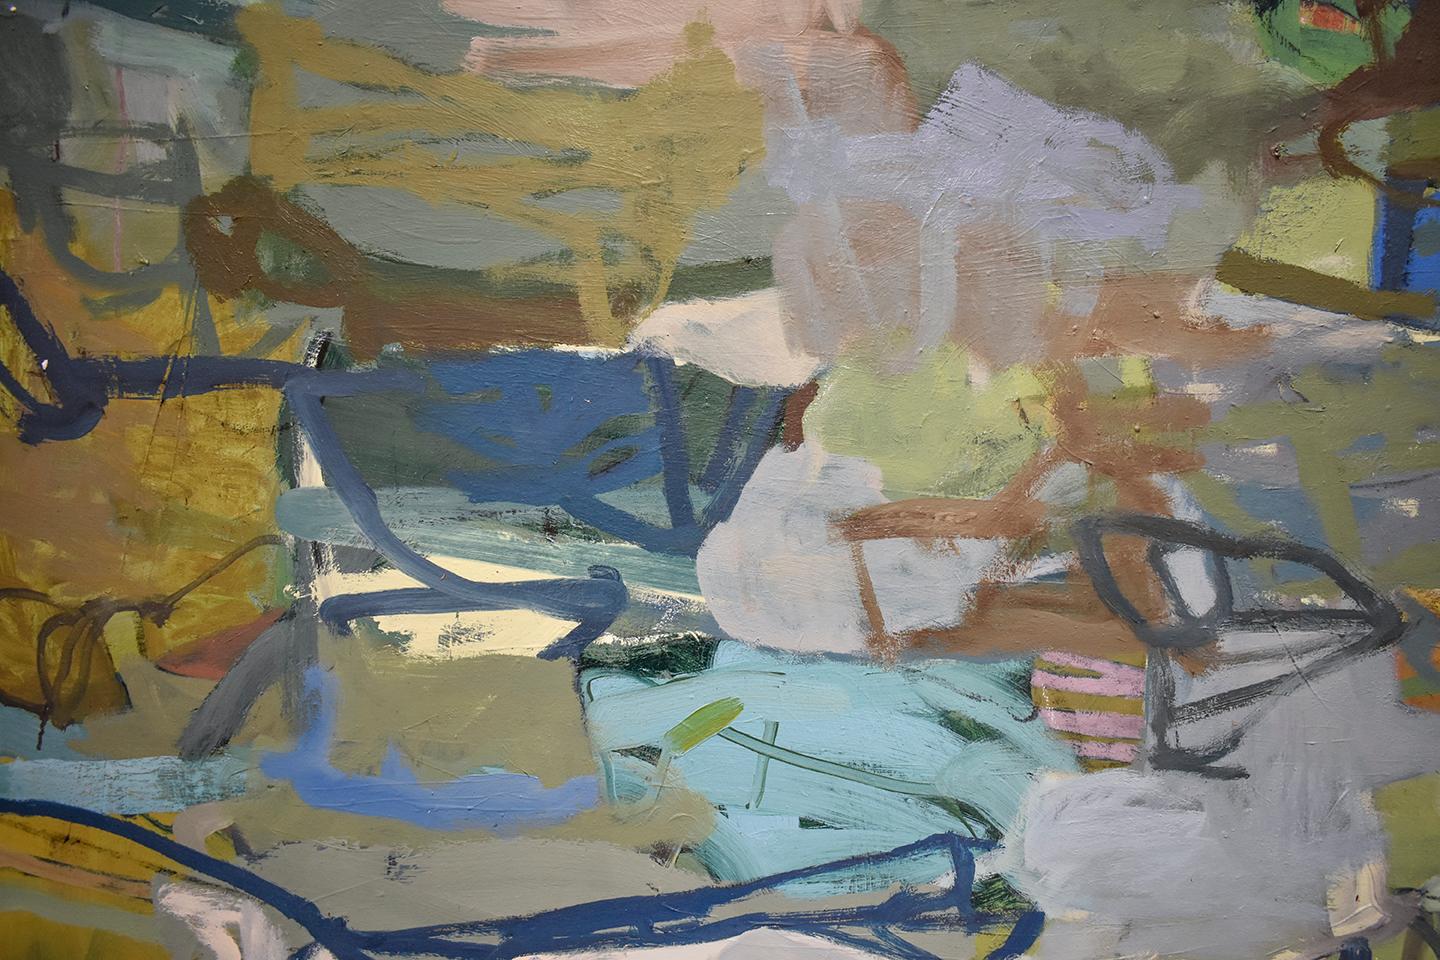 Edgewater Painting (Abstract Oil Painting on Canvas in Green, Blue & Grey) - Gray Abstract Painting by James O'Shea